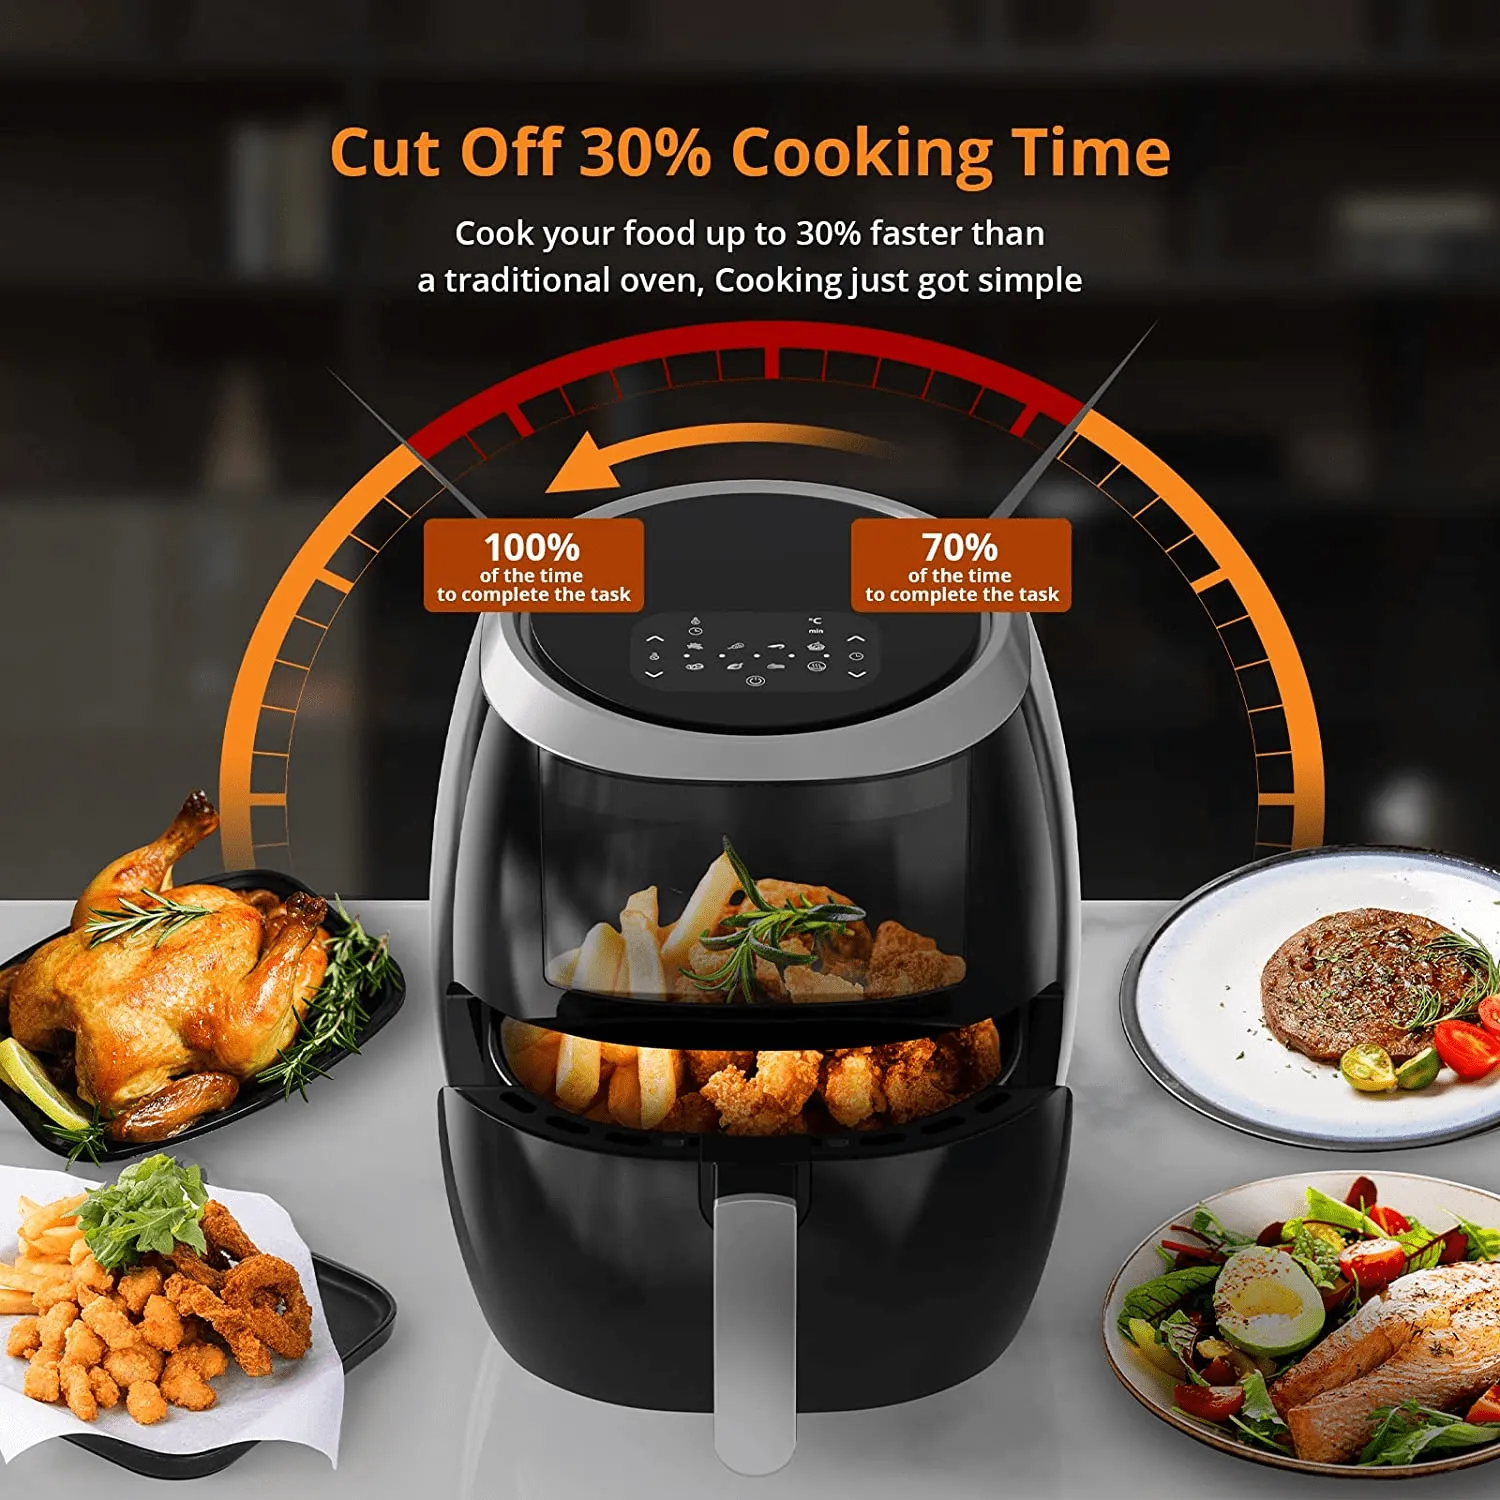 Large Air Fryer Capacity with Rapid Air Circulation